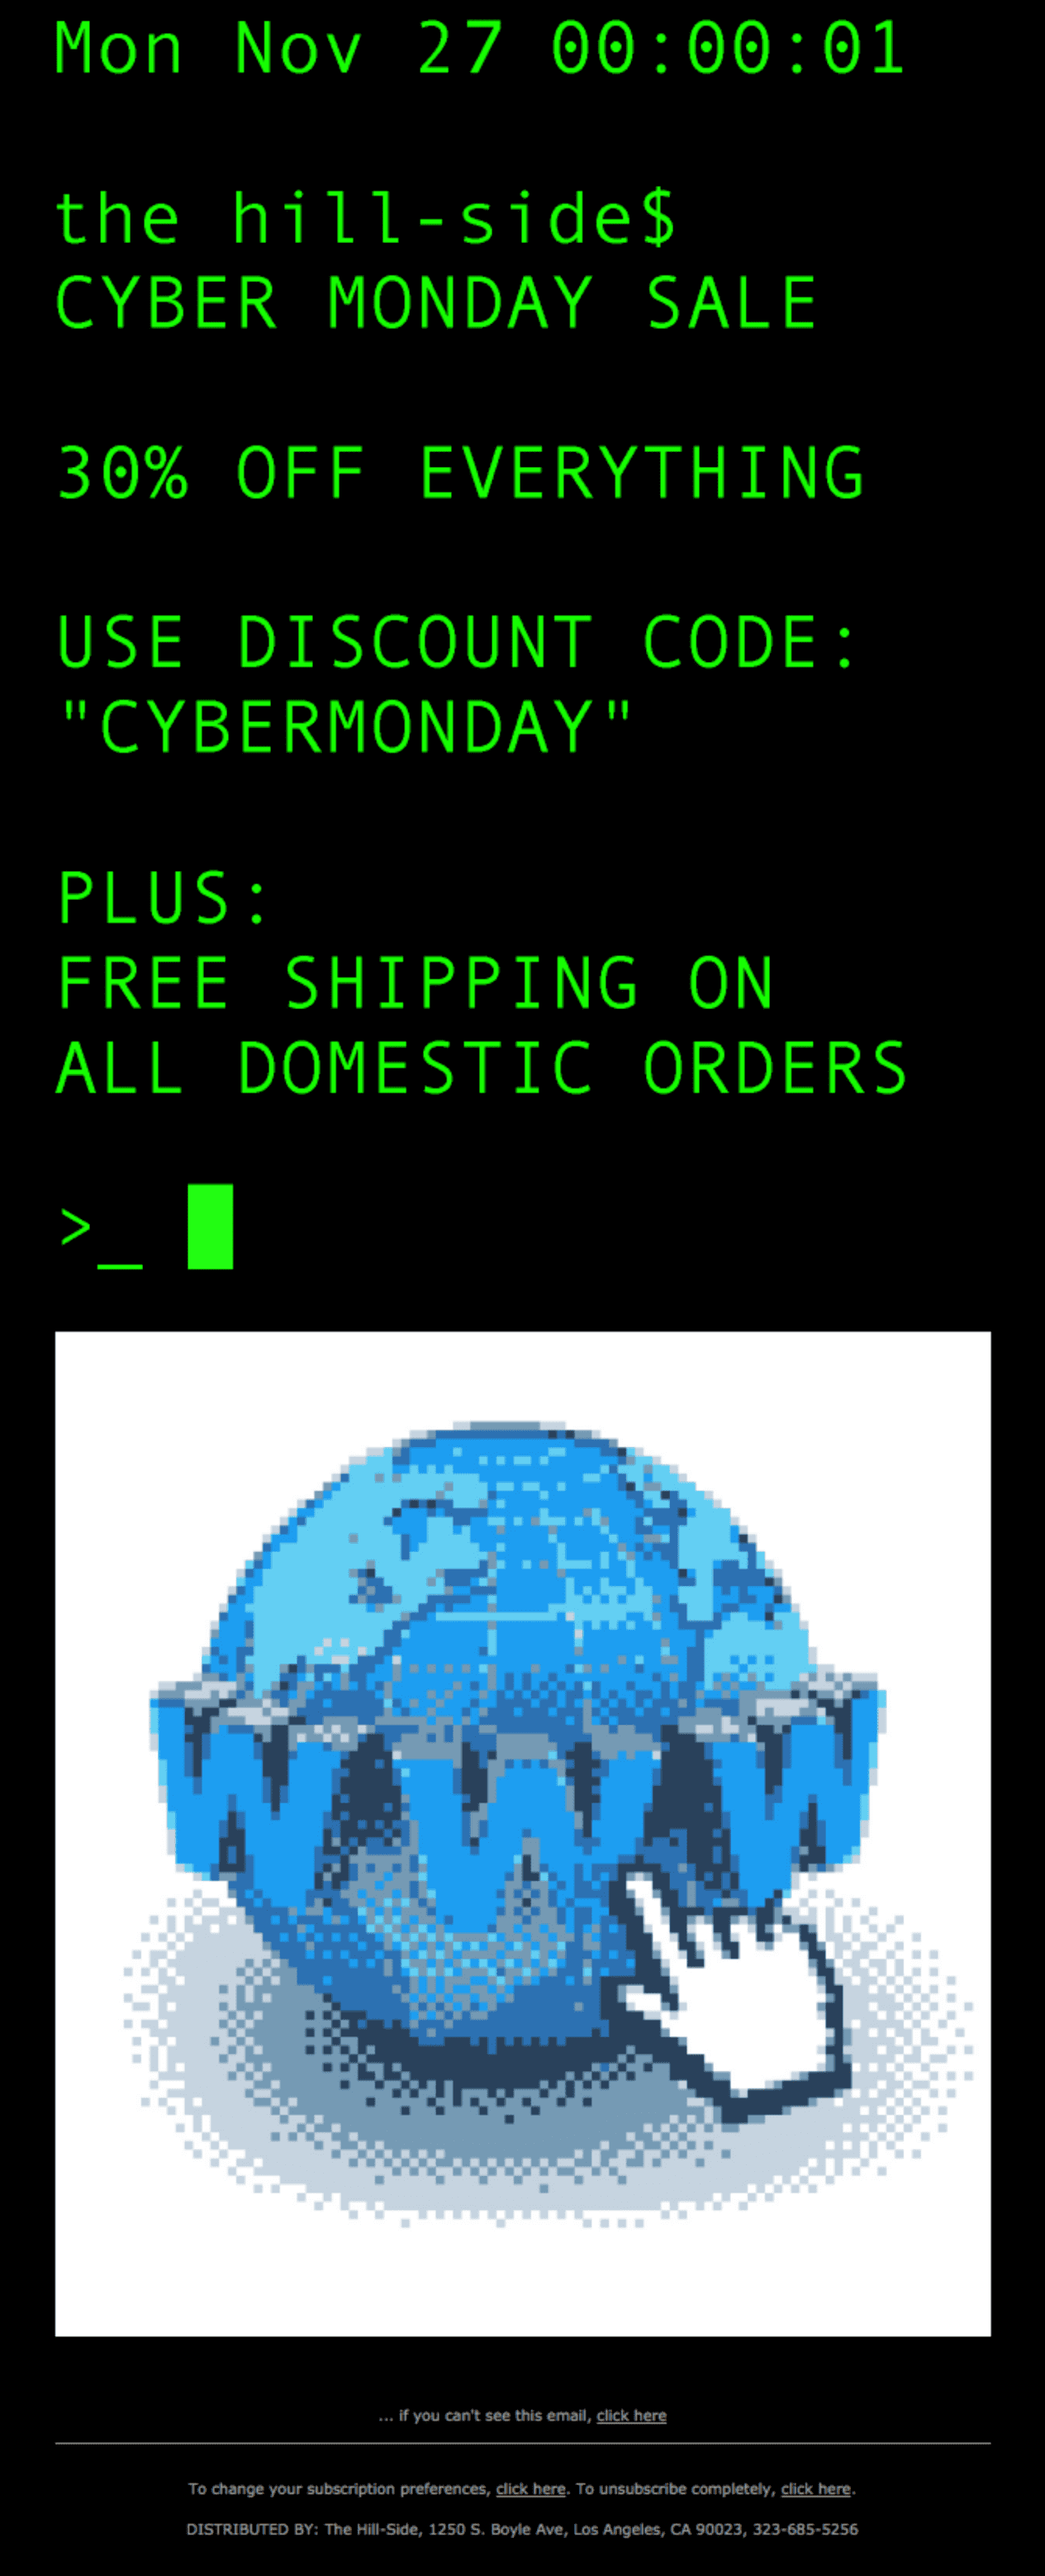 A Cyber Monday sale email with neon green text on a black background